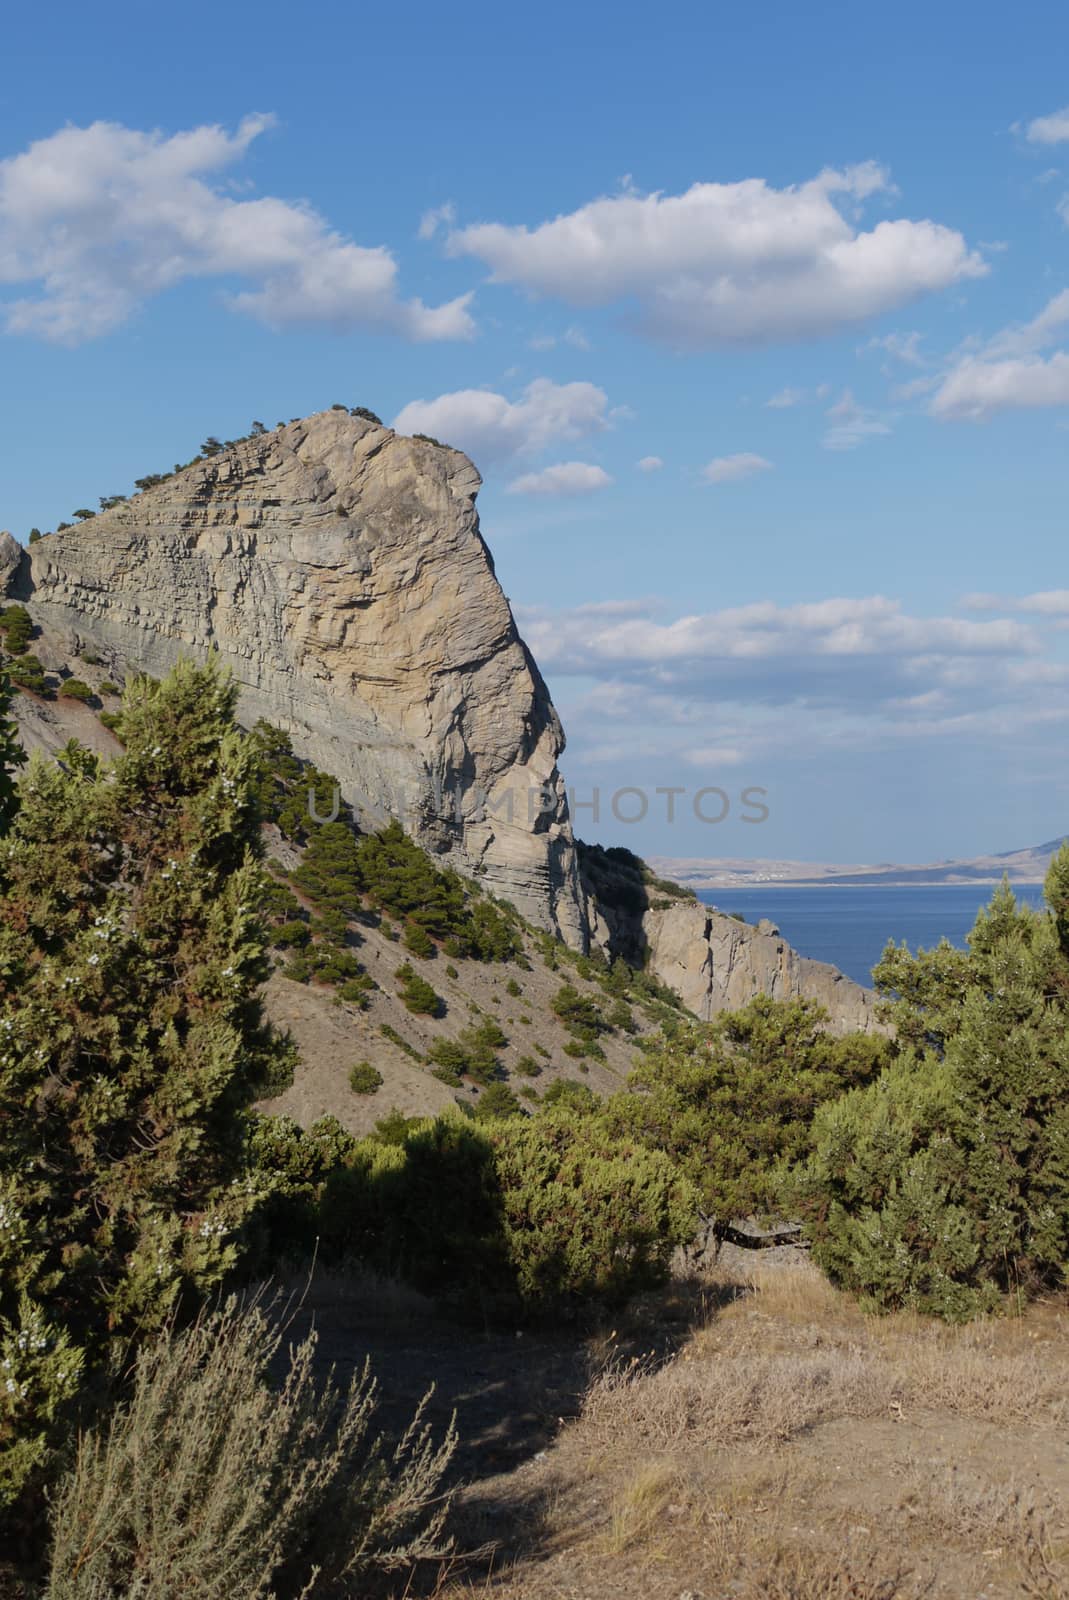 A beautiful view of the sea from behind a cliff on a hill with a rare grass and bushes. With a blue sky and white clouds floating into the distance beyond the horizon.